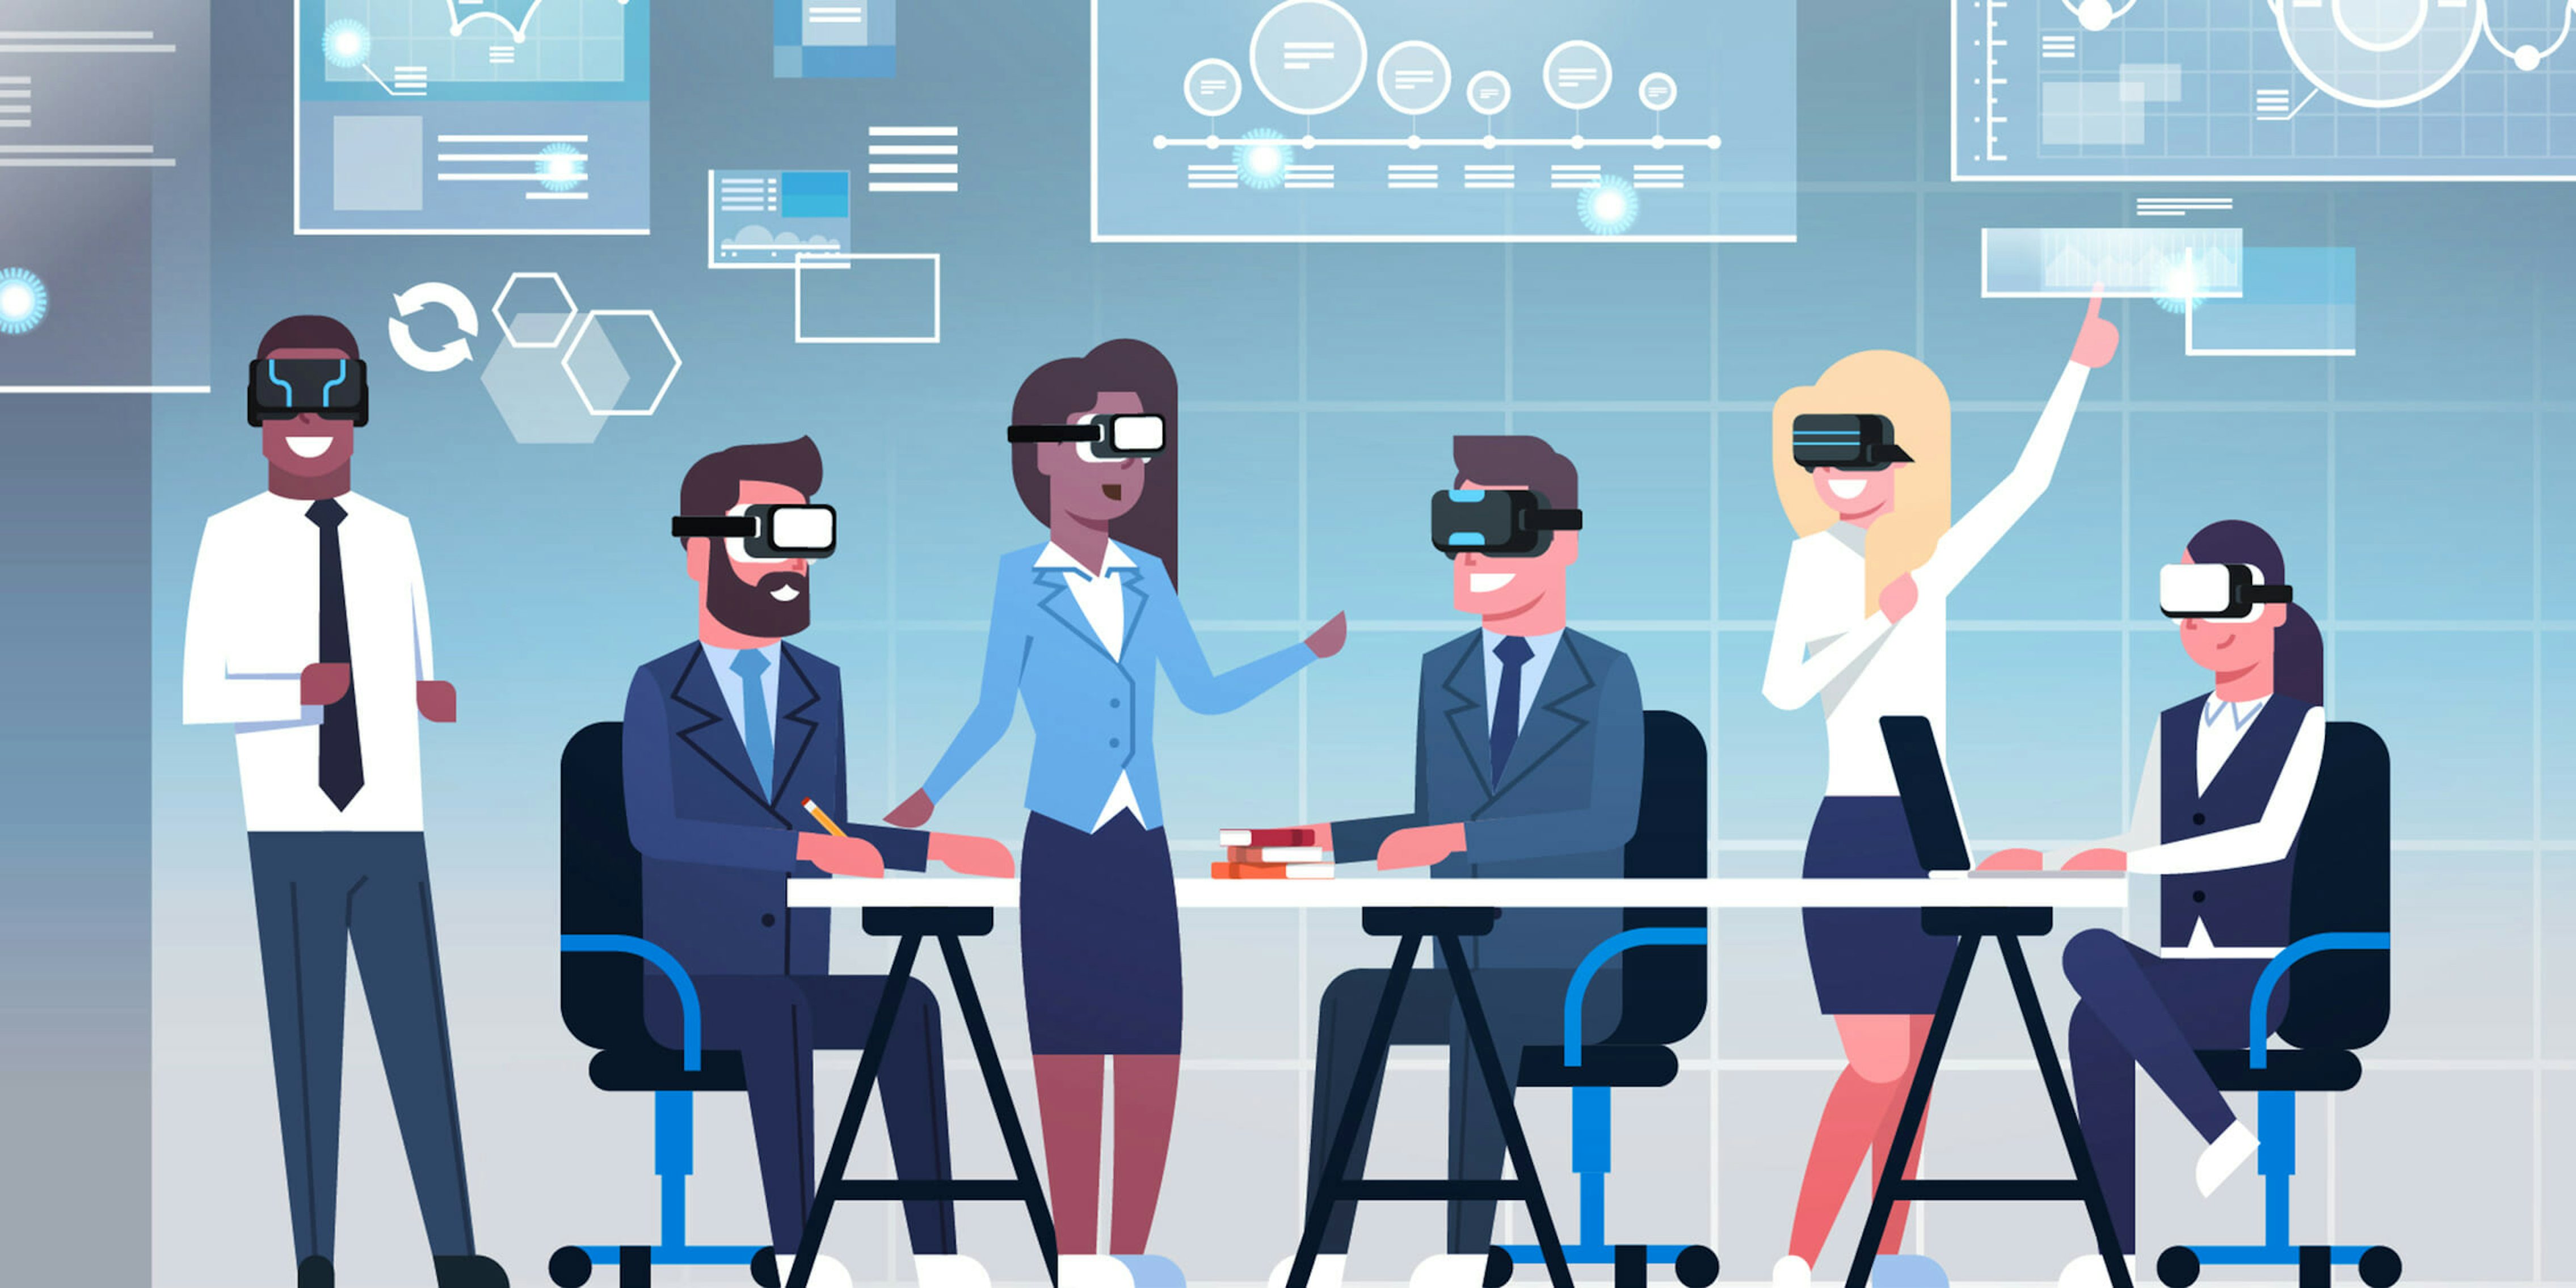 vr in the workplace